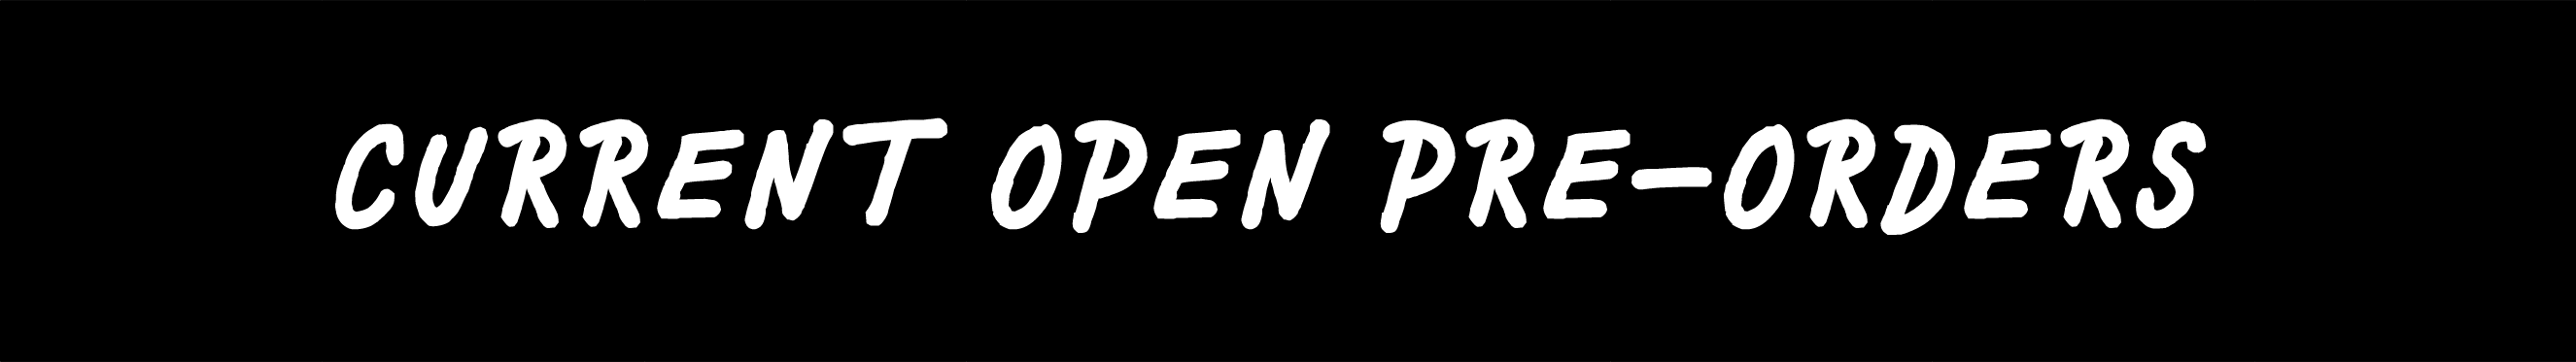 CURRENT OPEN PRE-ORDERS